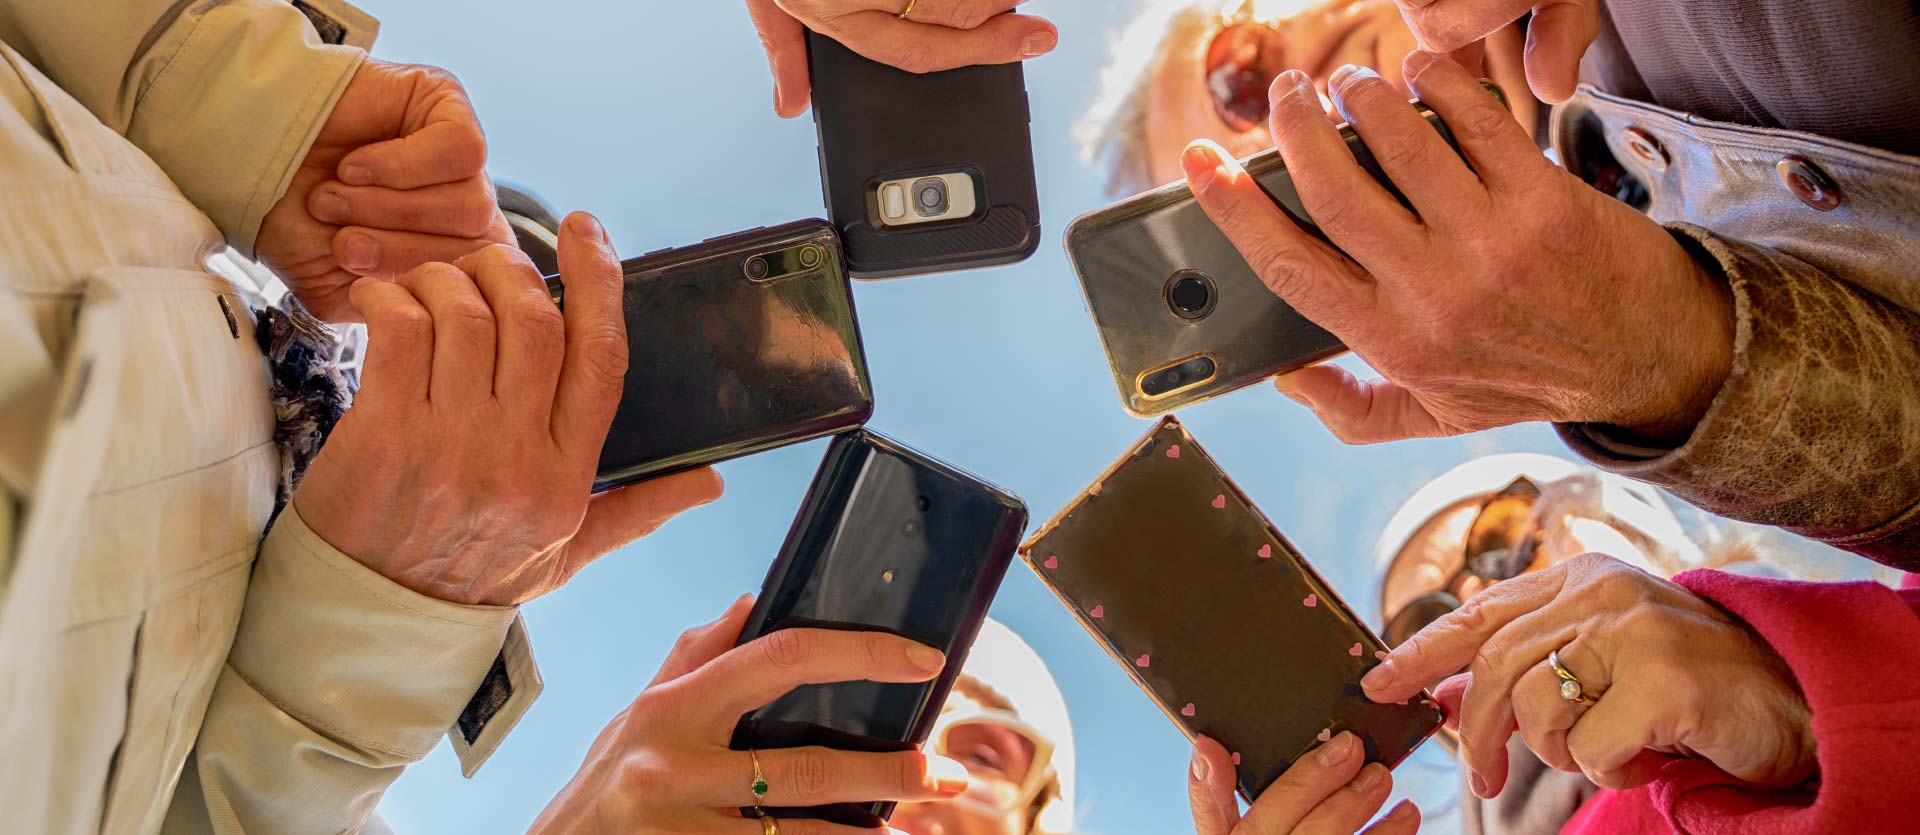 Group of all ages holding and using smartphones.